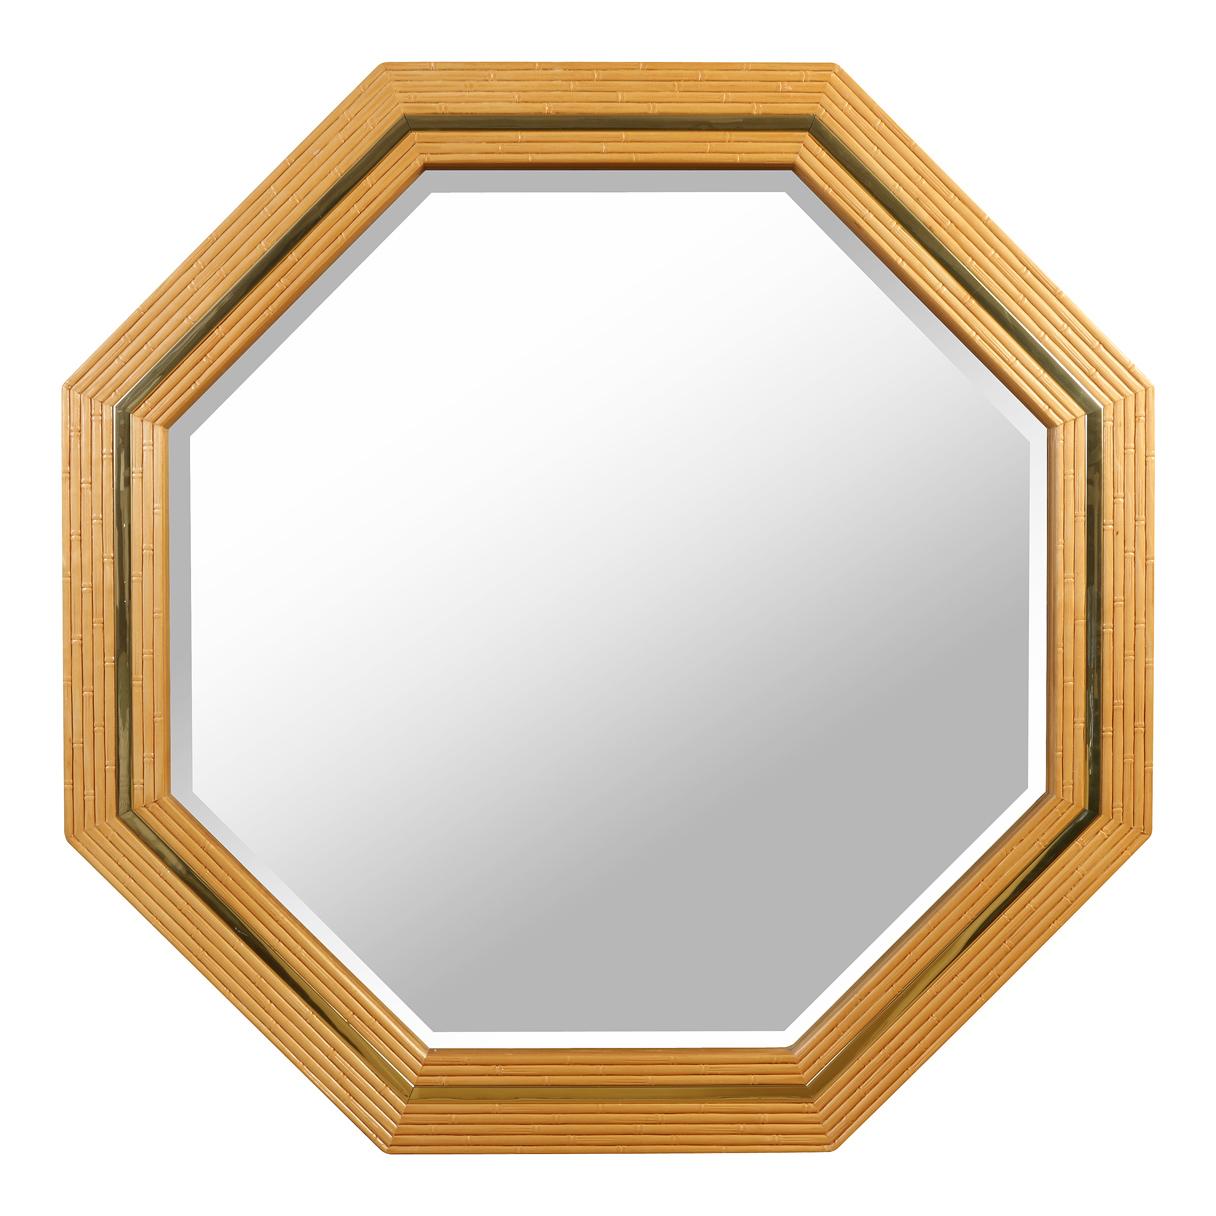 An octagonal, mid-century style, faux bamboo and brass wall mirror.  Crafted of reeded oak to resemble bamboo with a brass detail inset.  